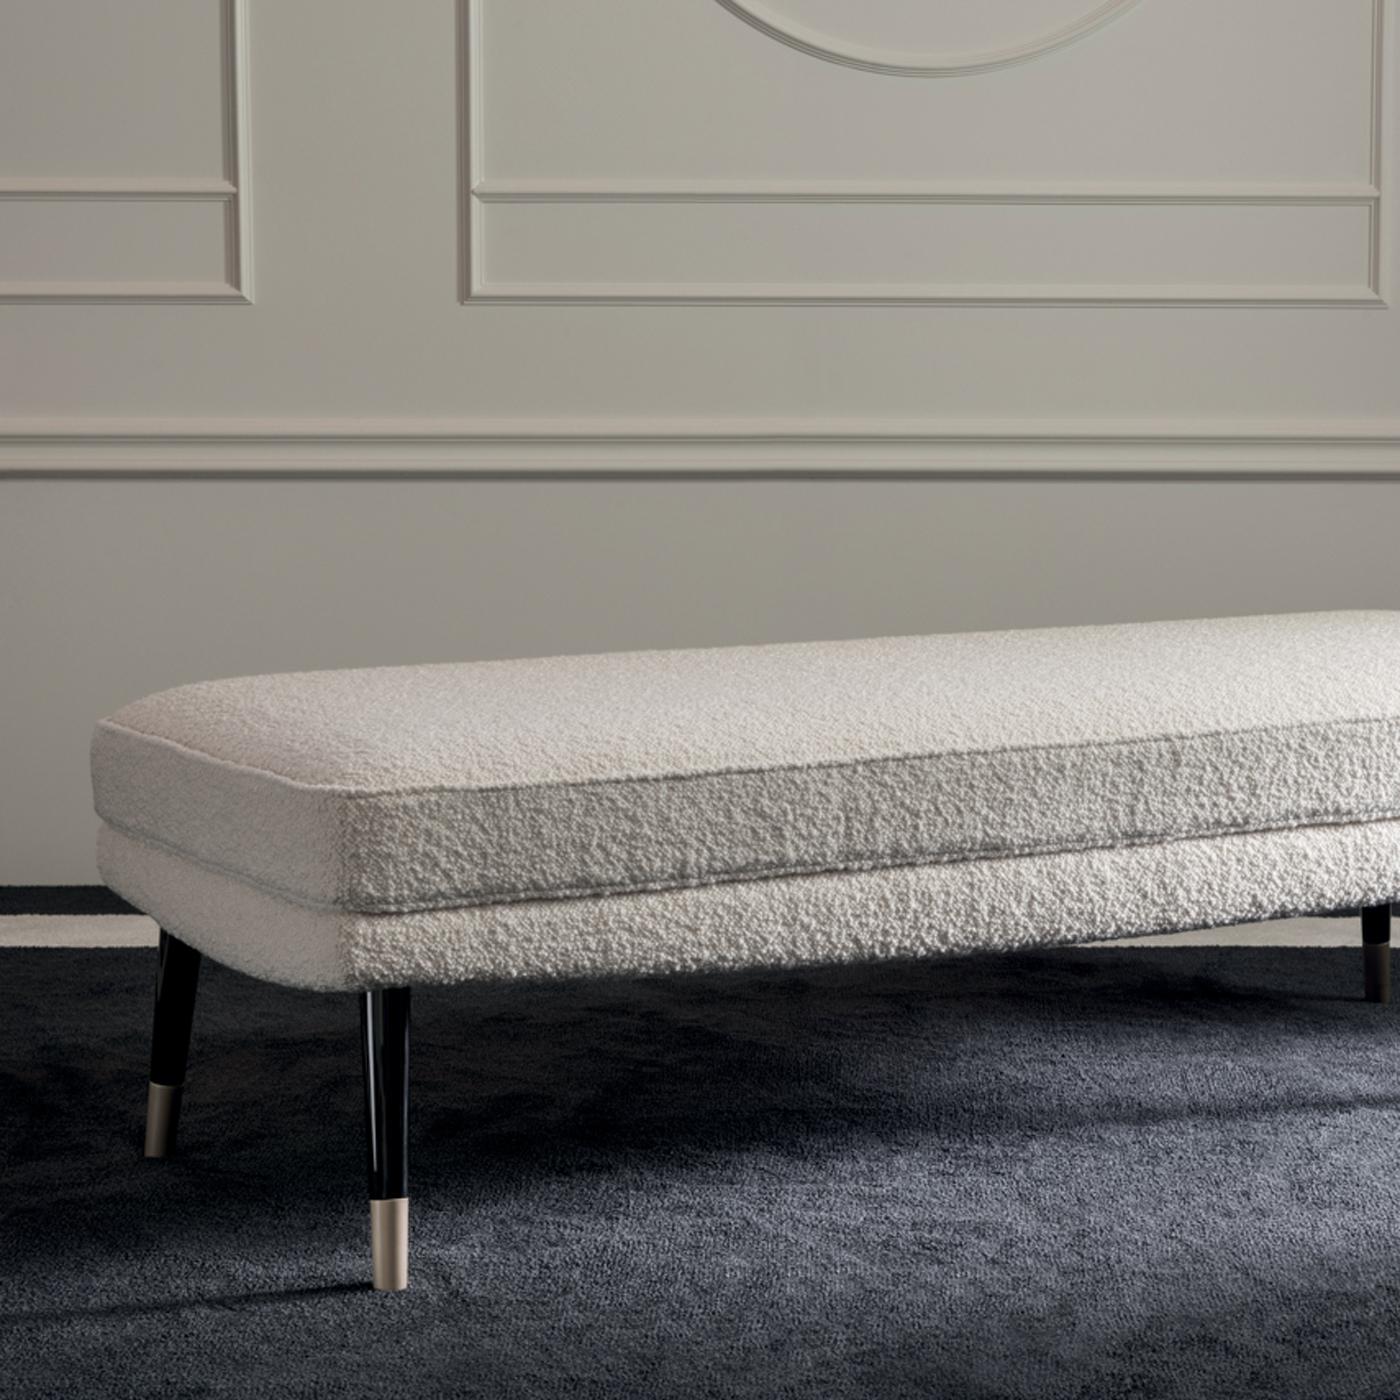 Marked by sartorial appeal and retro flair, this exclusive bench of the Bernadette collection is a Classic home accent that will never go out of style. The compact, rectangular frame showcases a cushioned seat (40 cm high) upholstered in refined